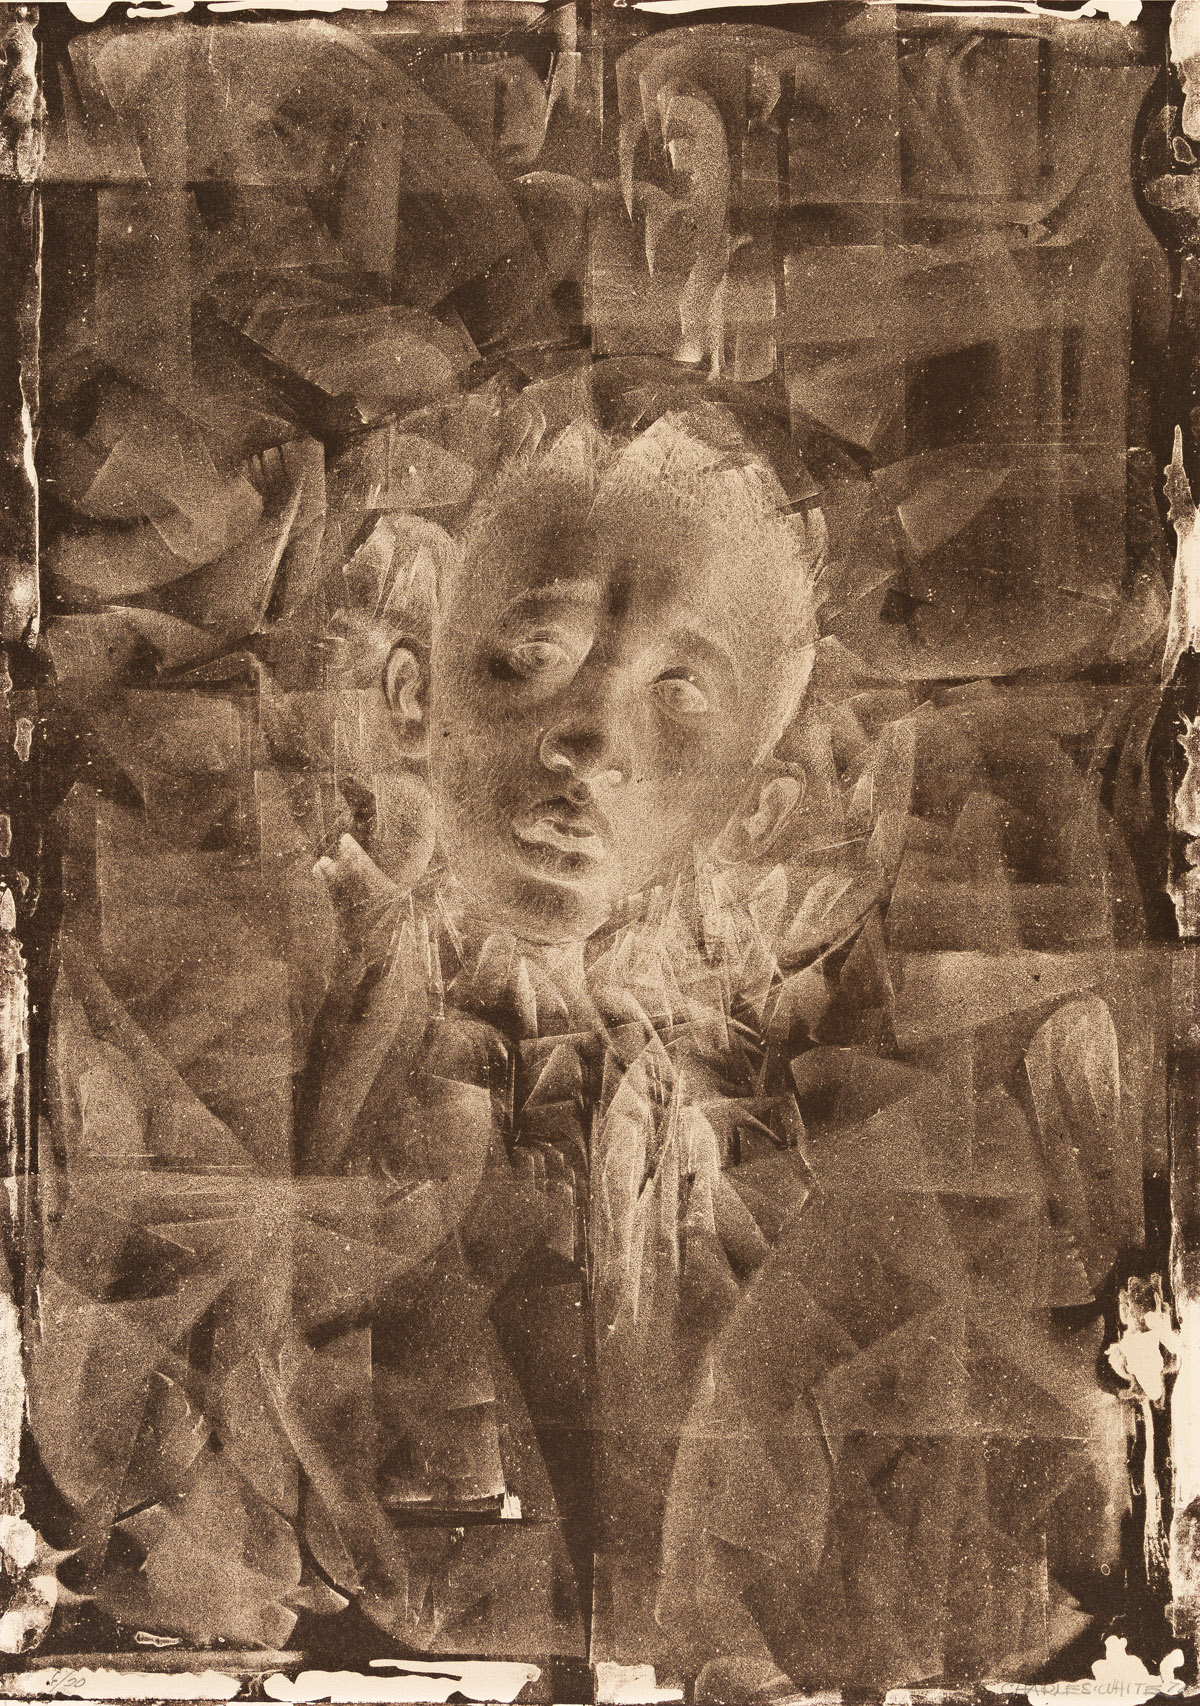 CHARLES WHITE (1918 - 1979) Wanted Poster Series #11 and #11a (Positive and Negative Image).